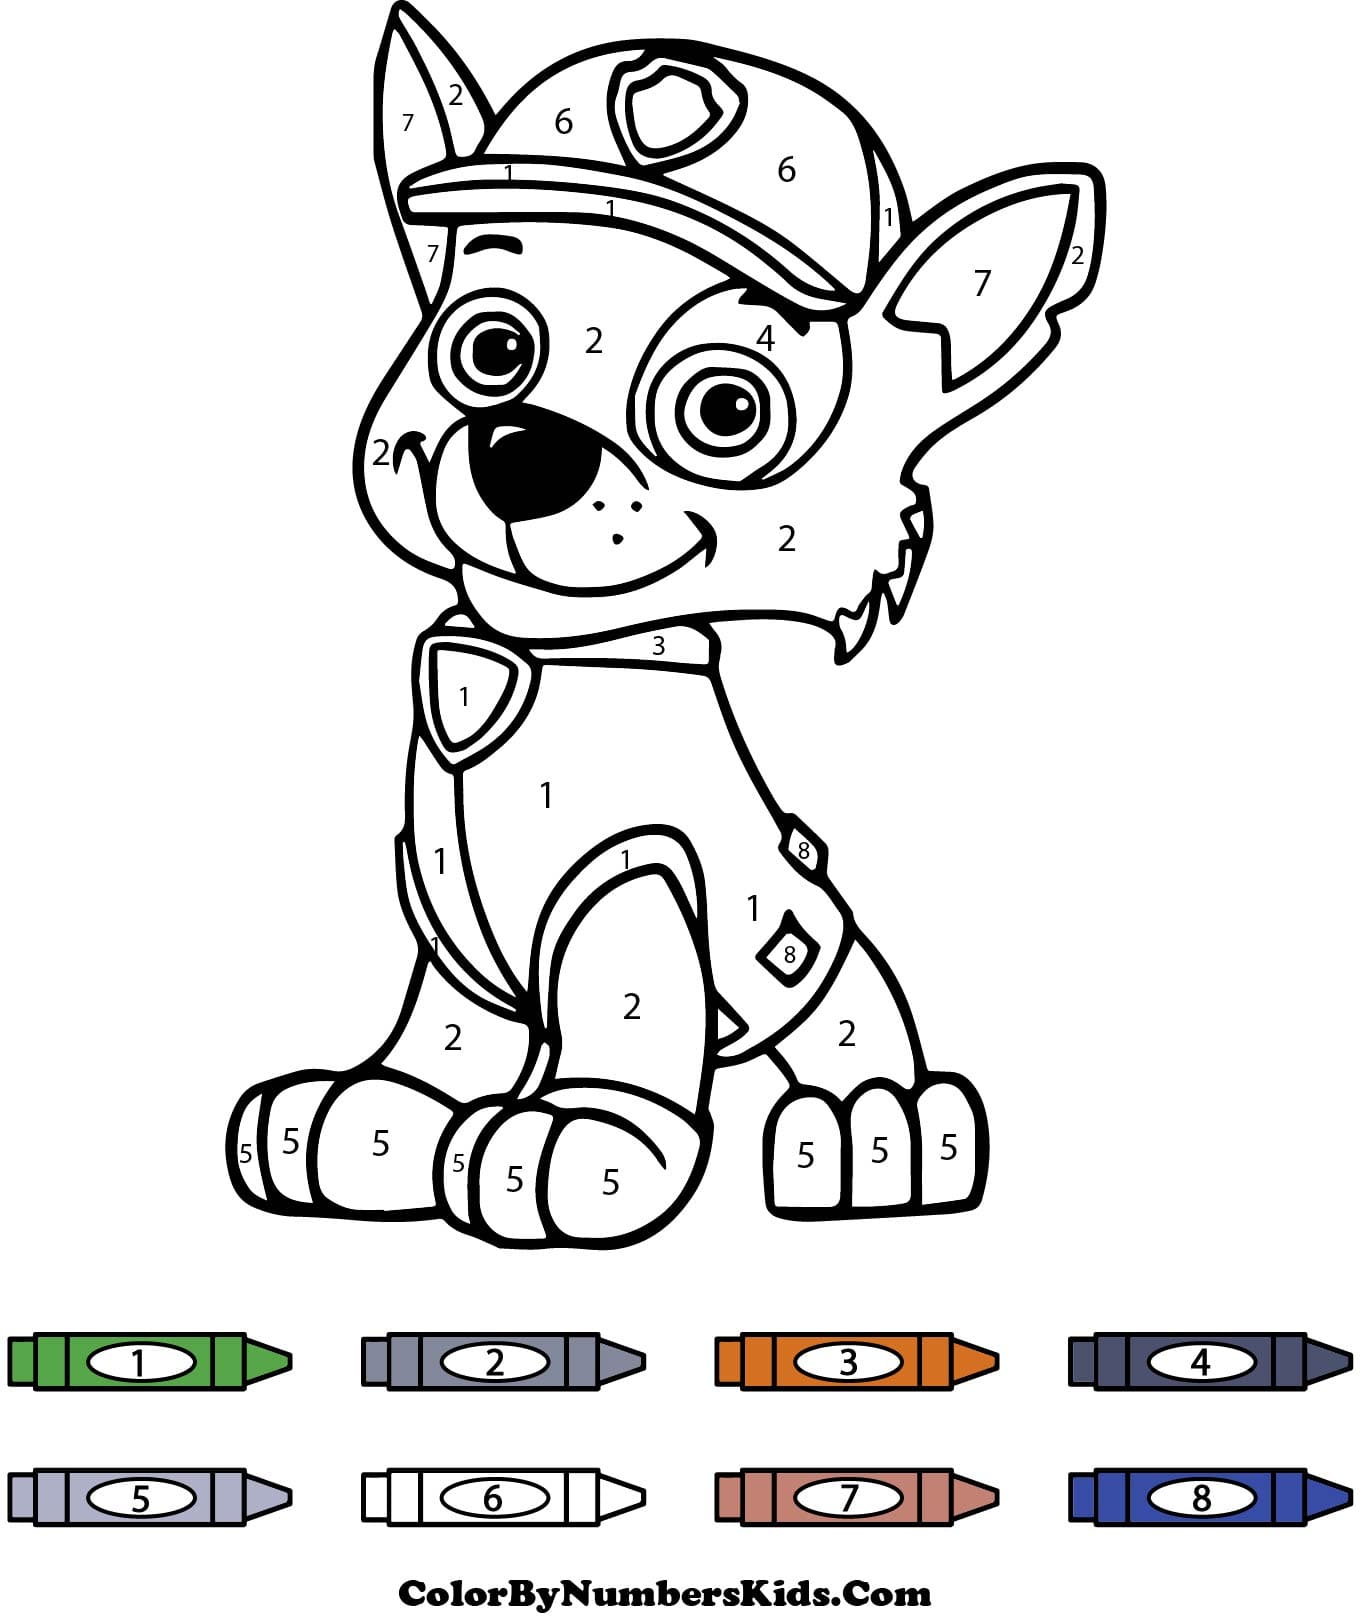 Paw Patrol Color By Number